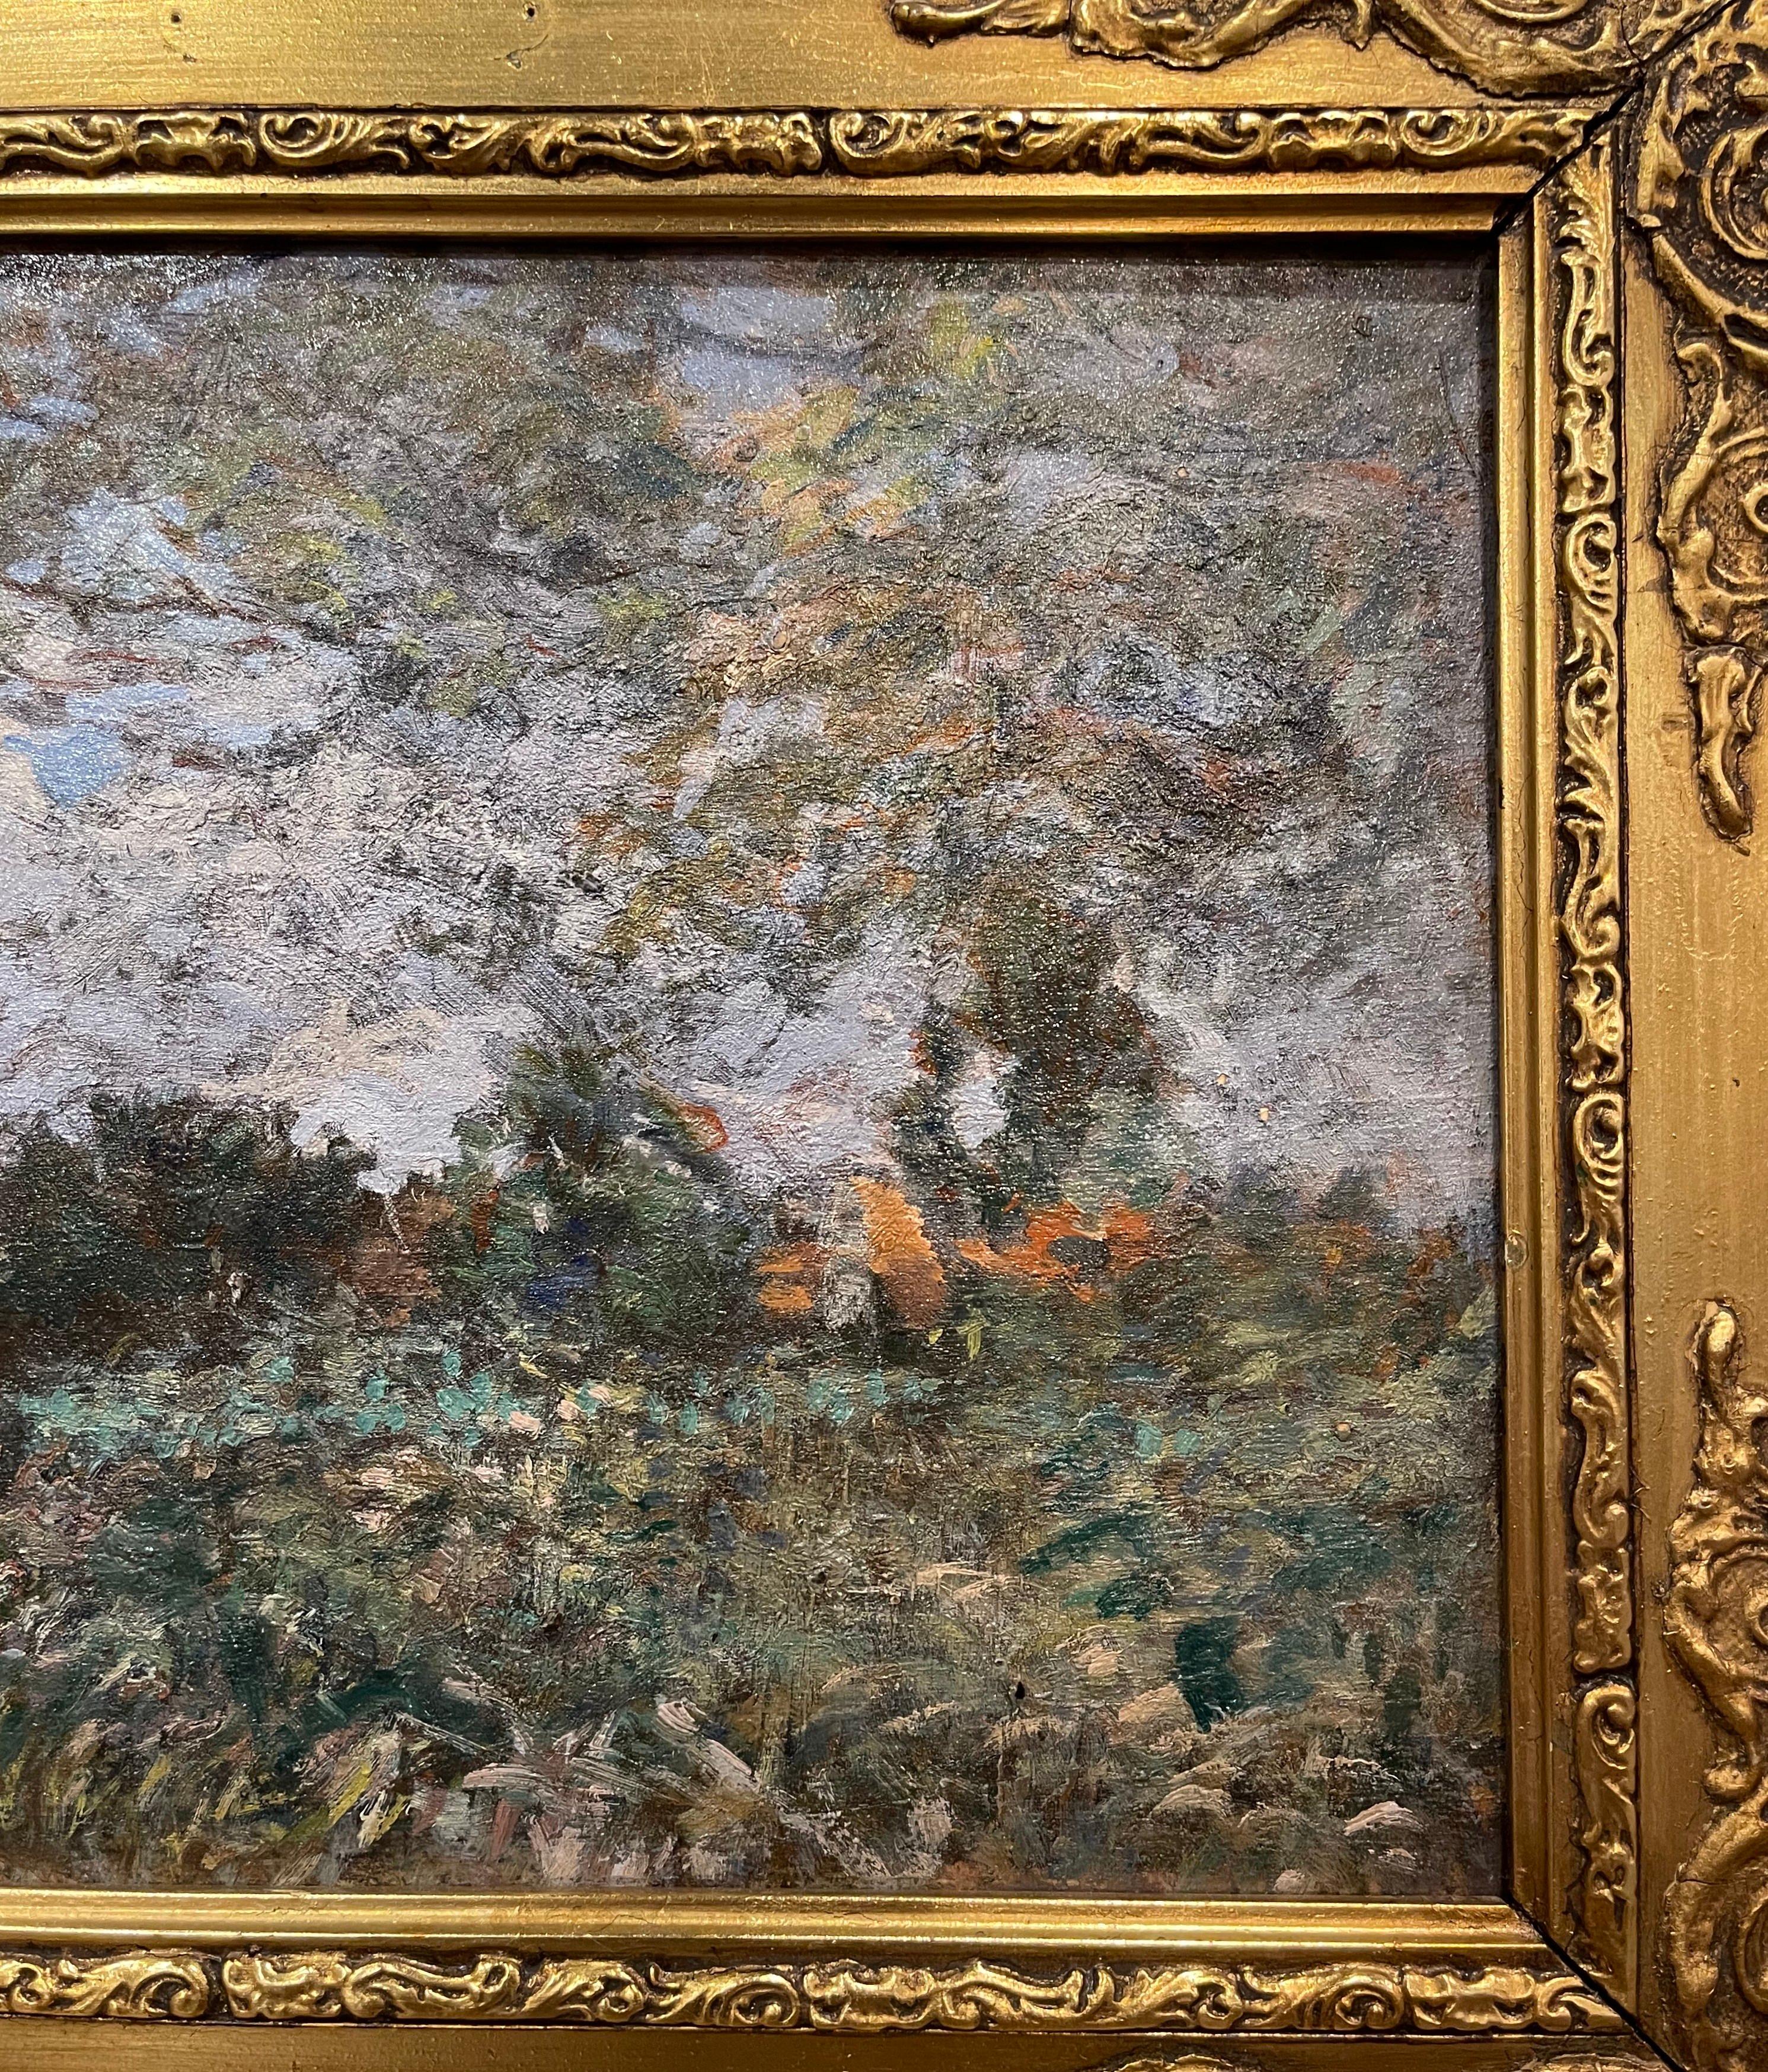 19th Century French Oil on Board Painting Signed H. D. Lemaitre In Excellent Condition For Sale In Dallas, TX